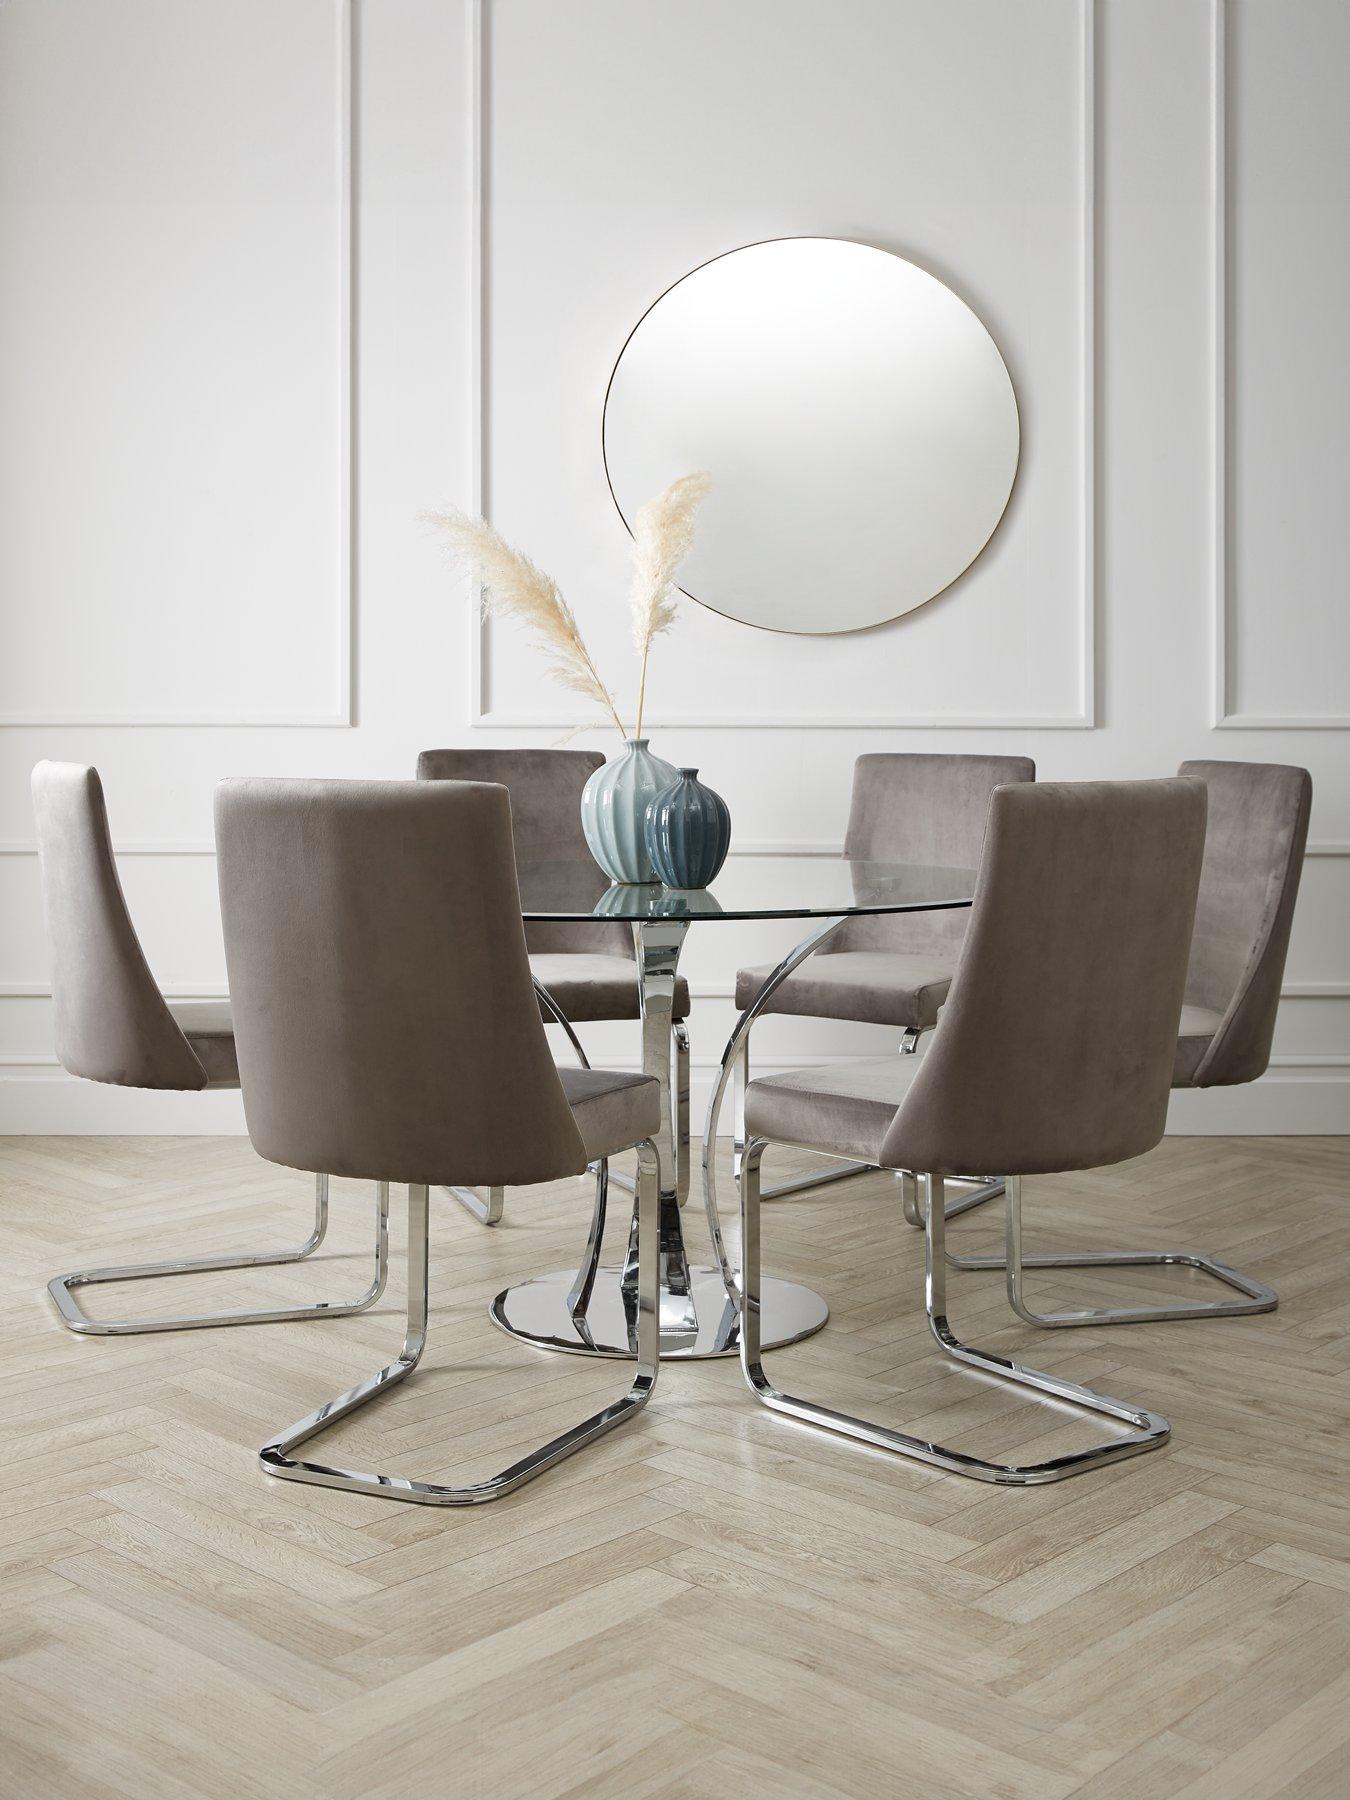 Very Home Alice 130 Cm Round Dining Table + 6 Velvet Chairs - Clear/Grey